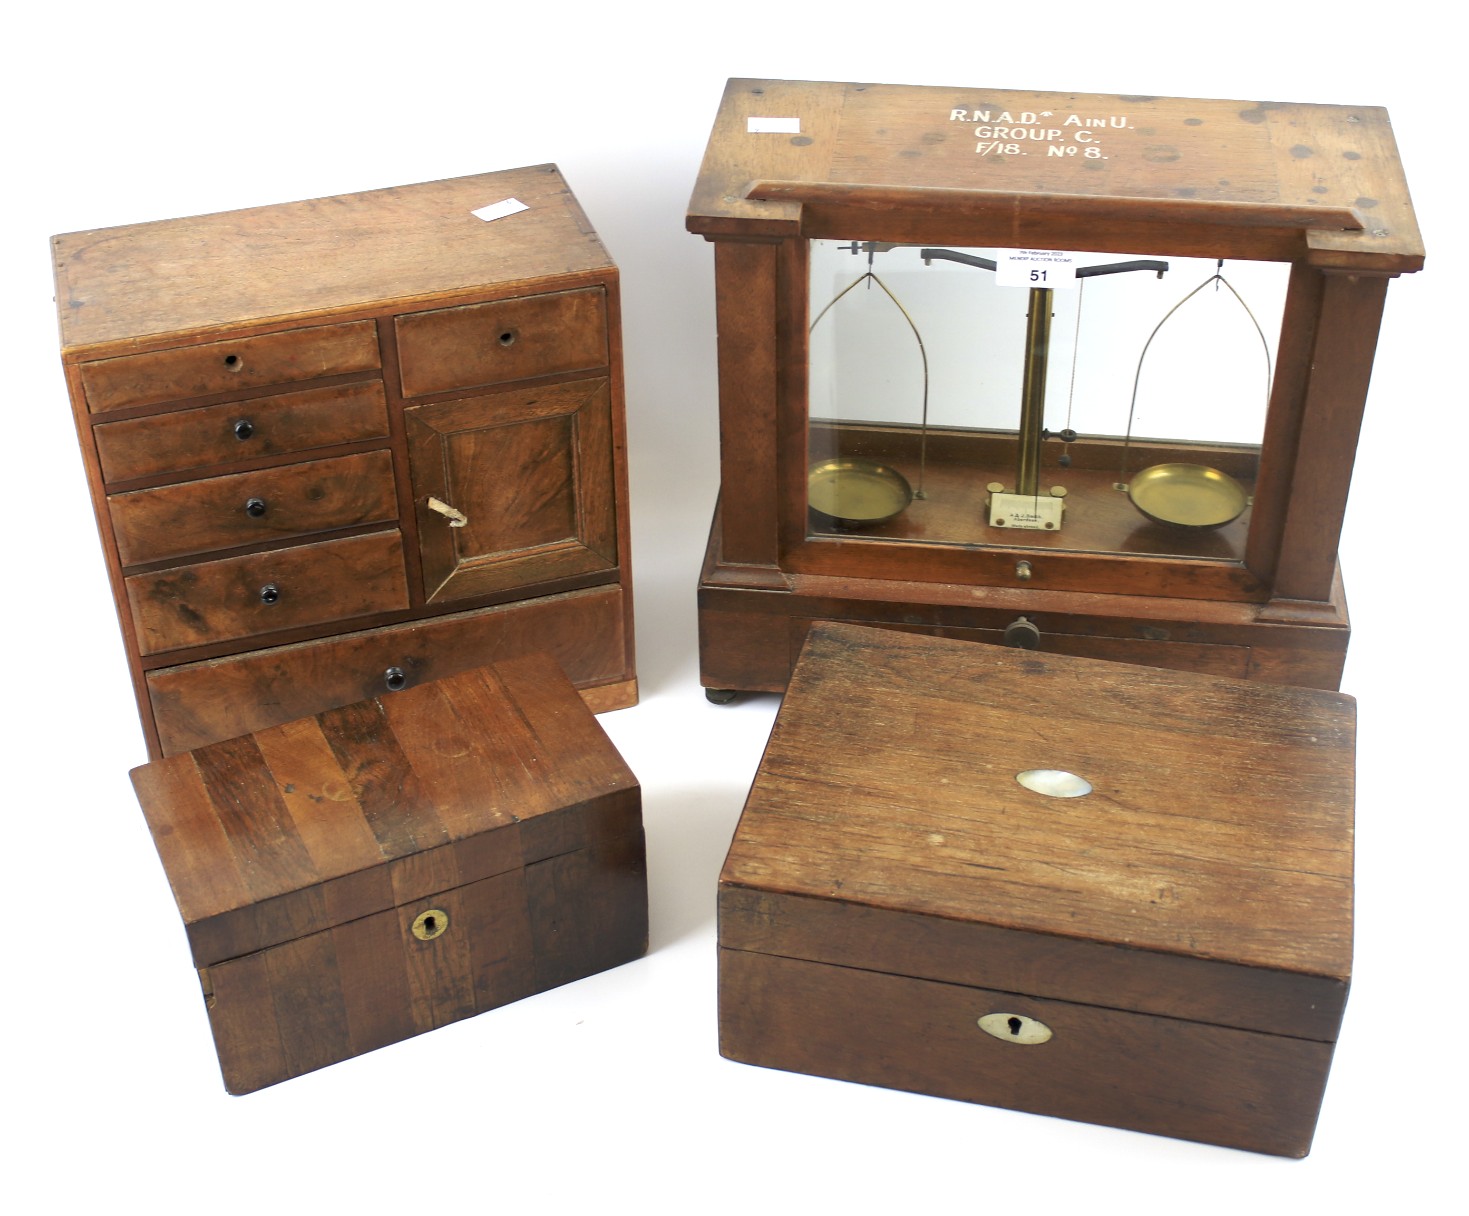 A pair of weighing scales, two wooden boxes and an apprentice miniature chest of drawers.